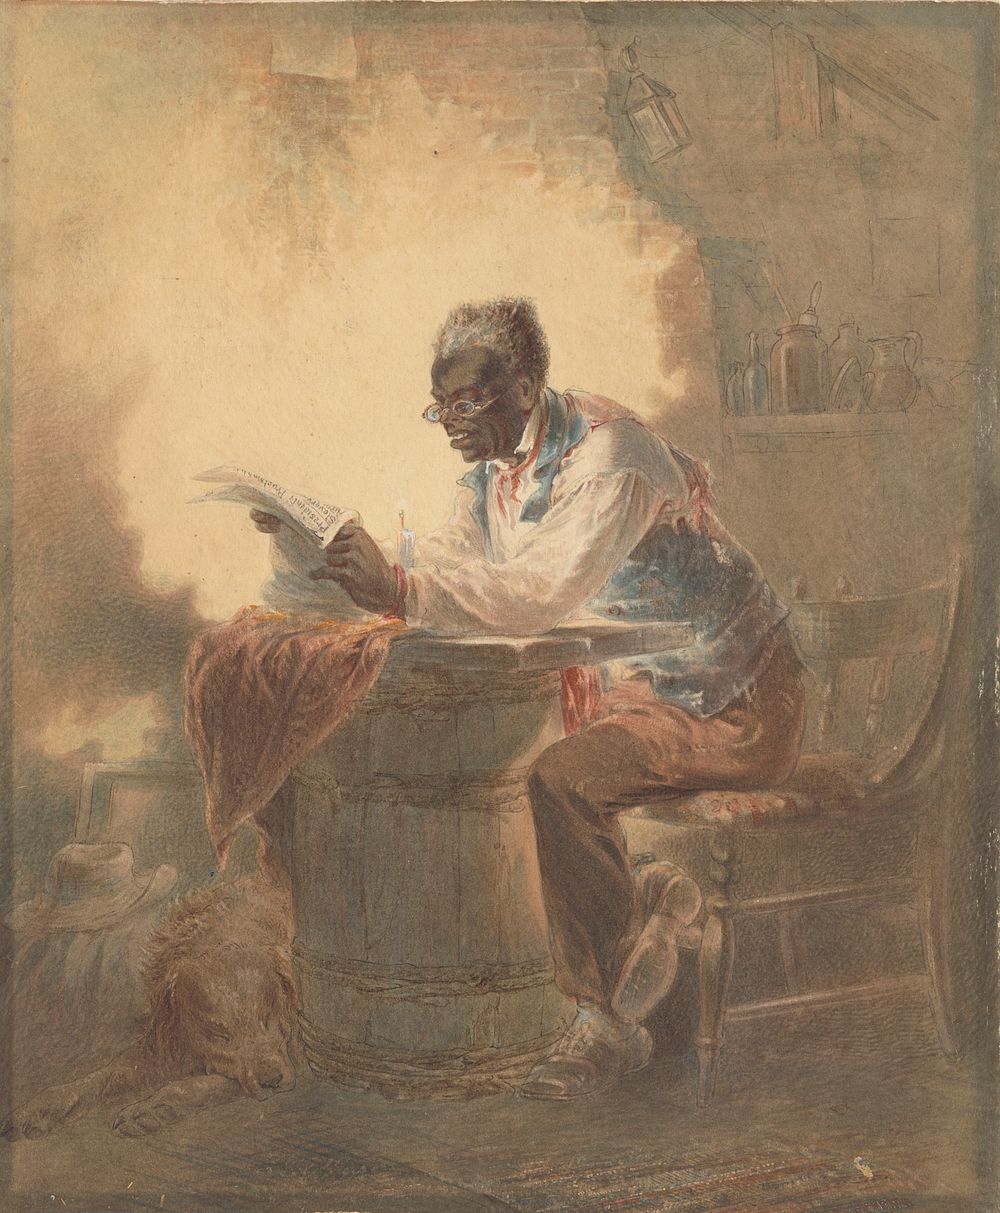 Black man reading newspaper by candlelight (ca 1863) by H L  Henry Louis Stephens